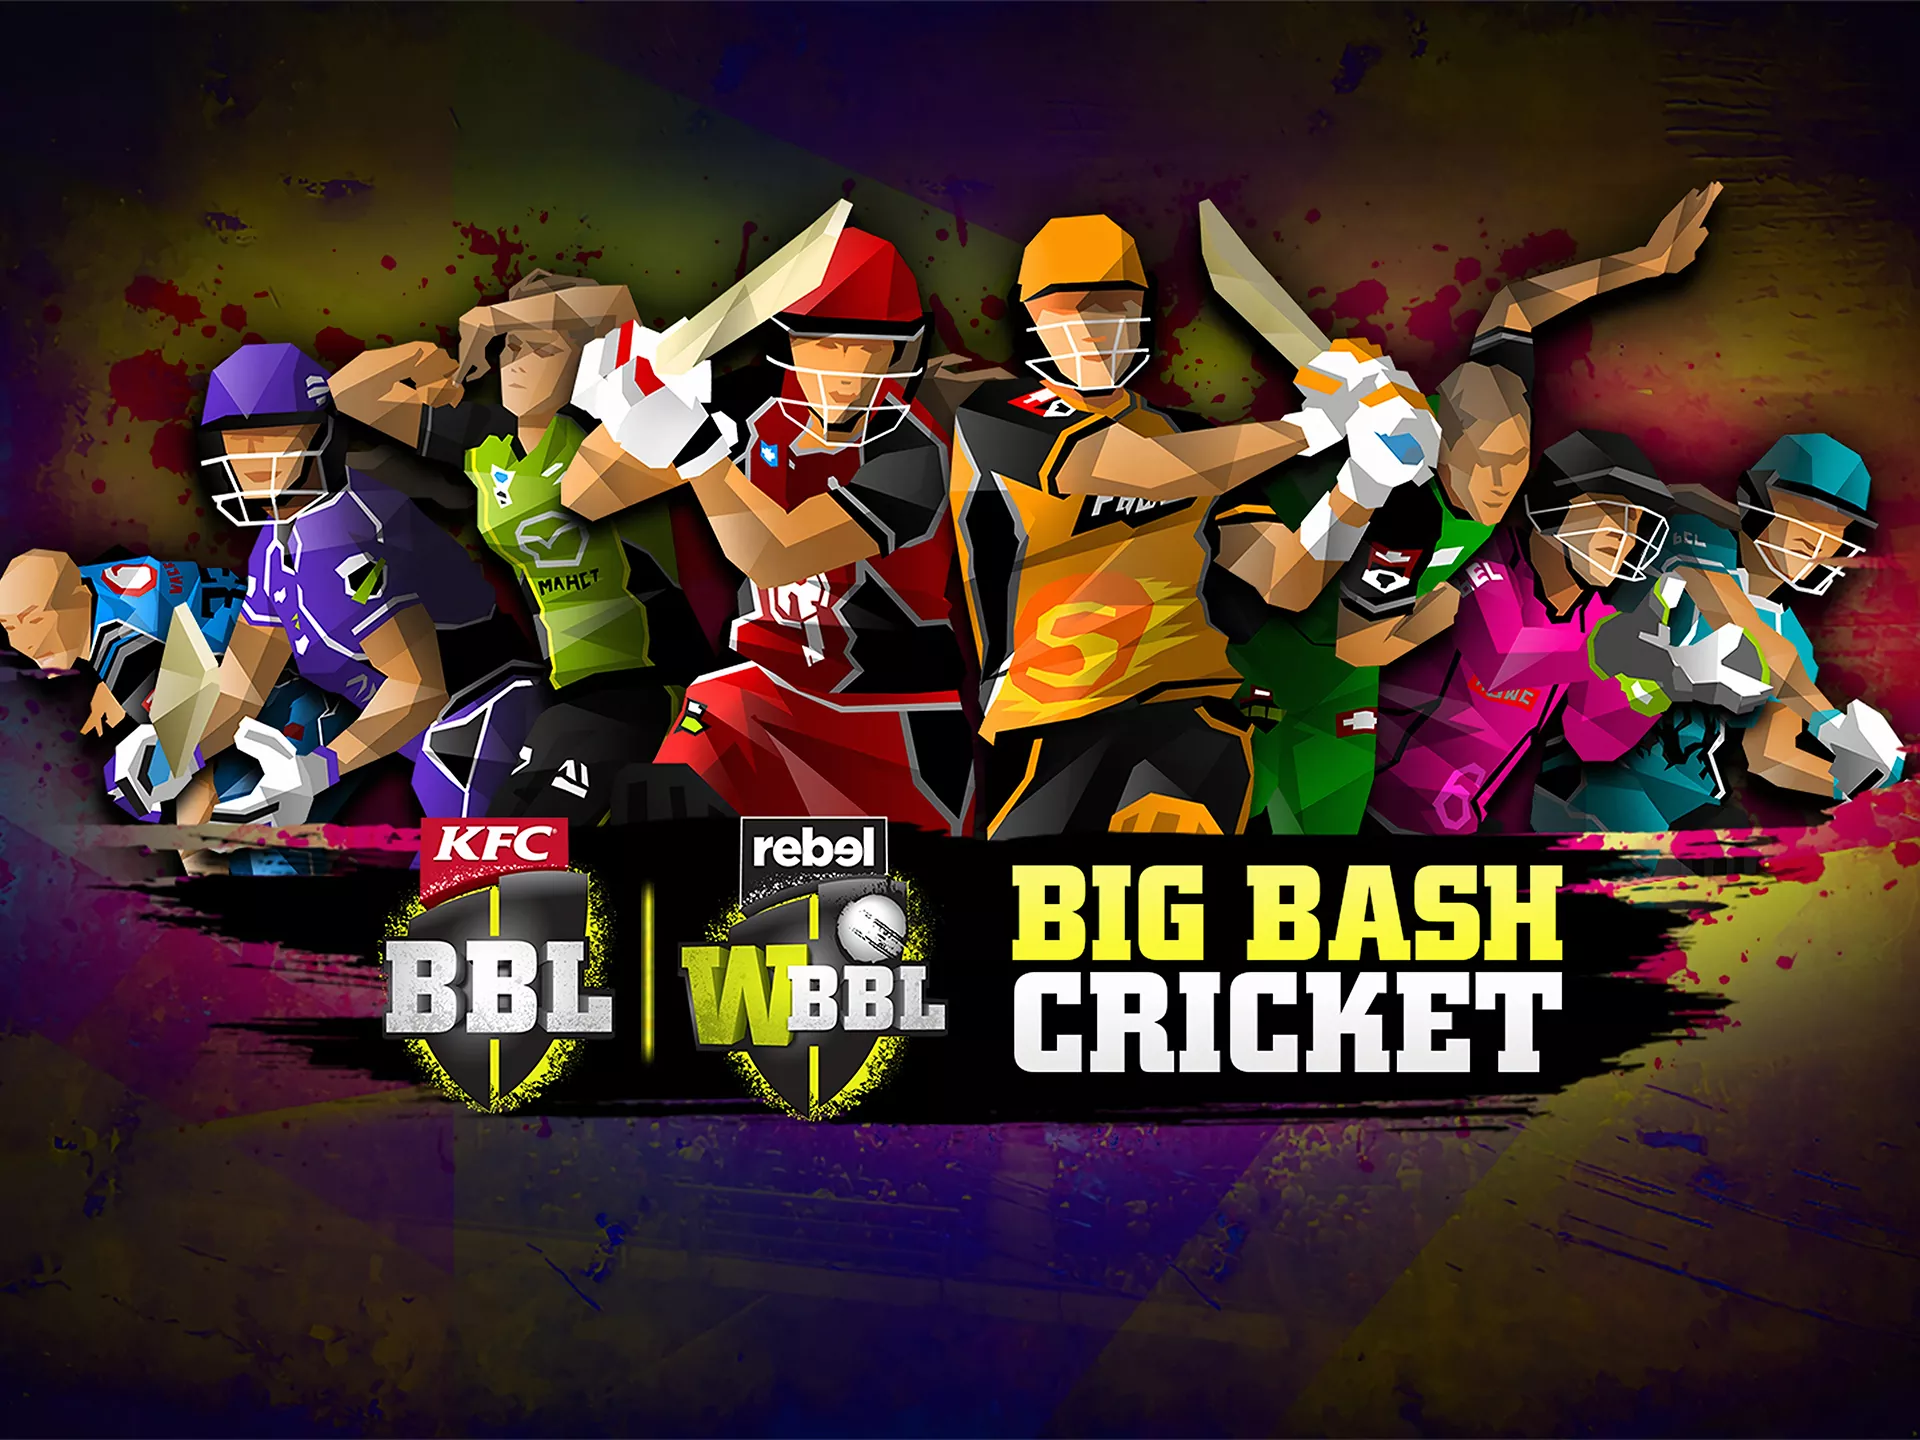 You can place bets on Big Bash League after registering on the site